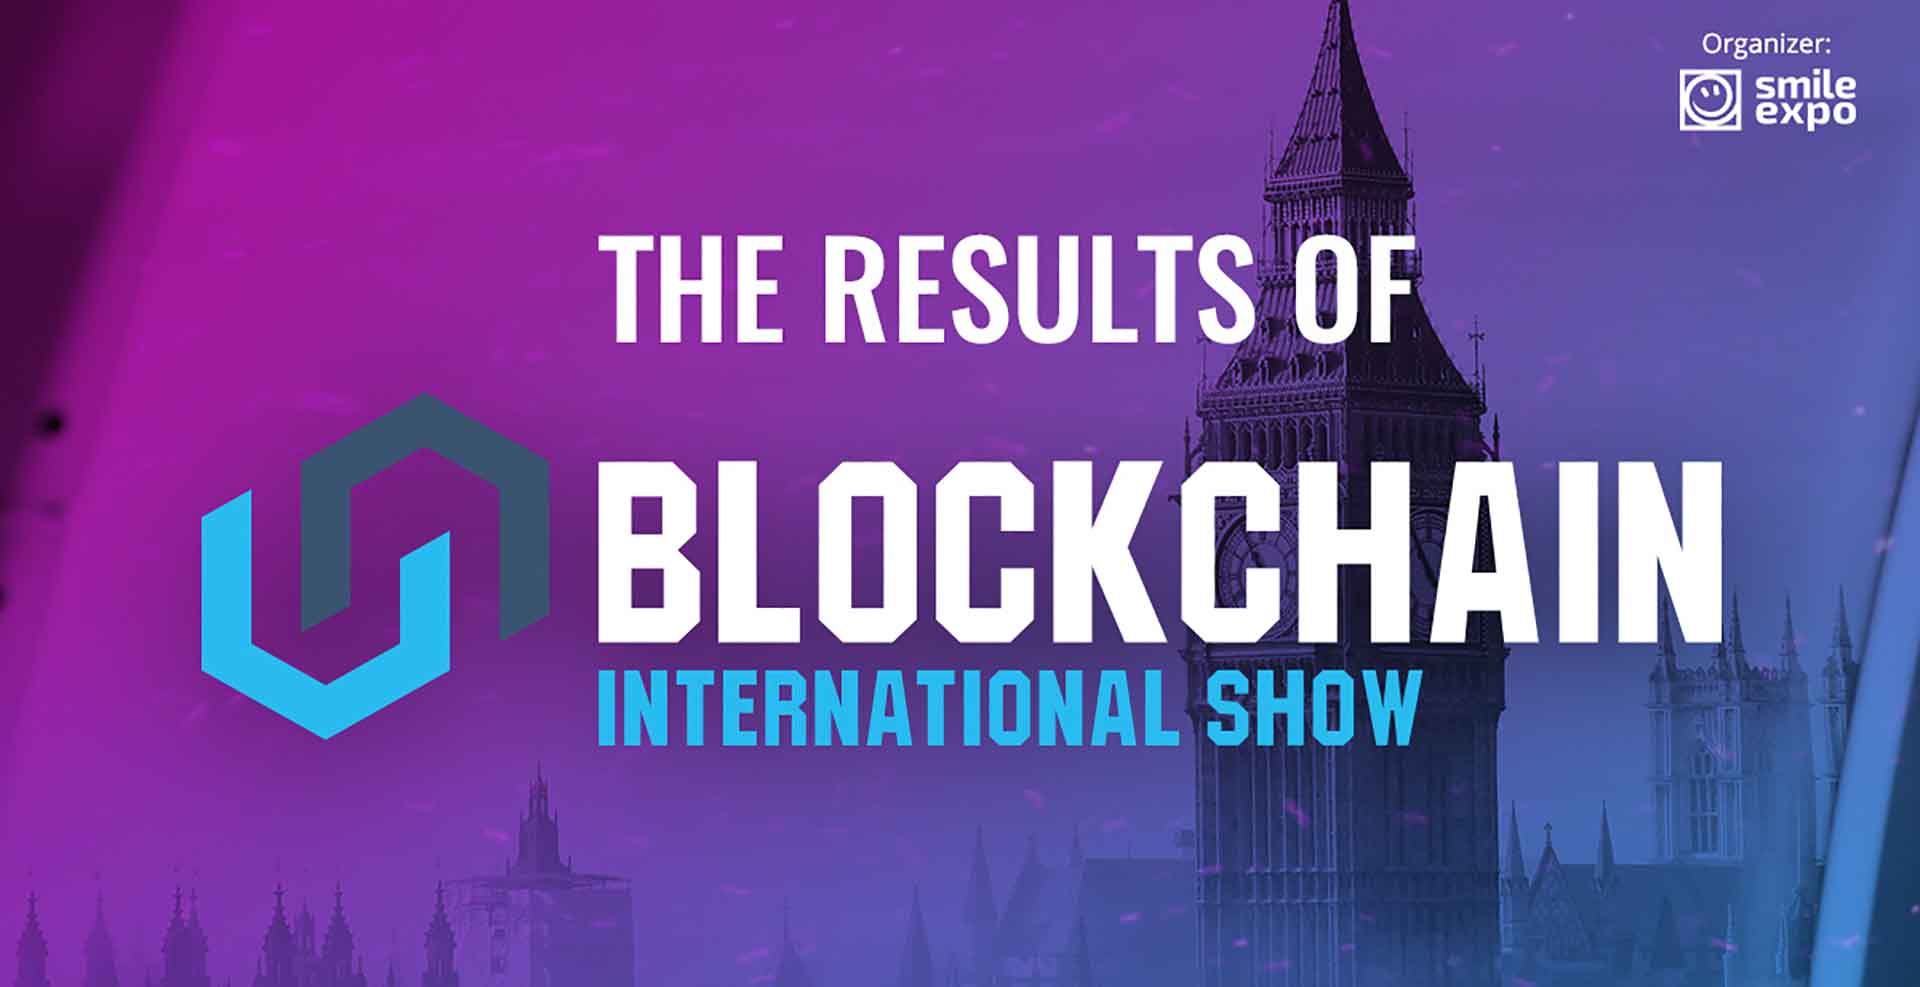 London Blockchain Conference Featured Representatives of IBM, KPMG, and the Dutch Government